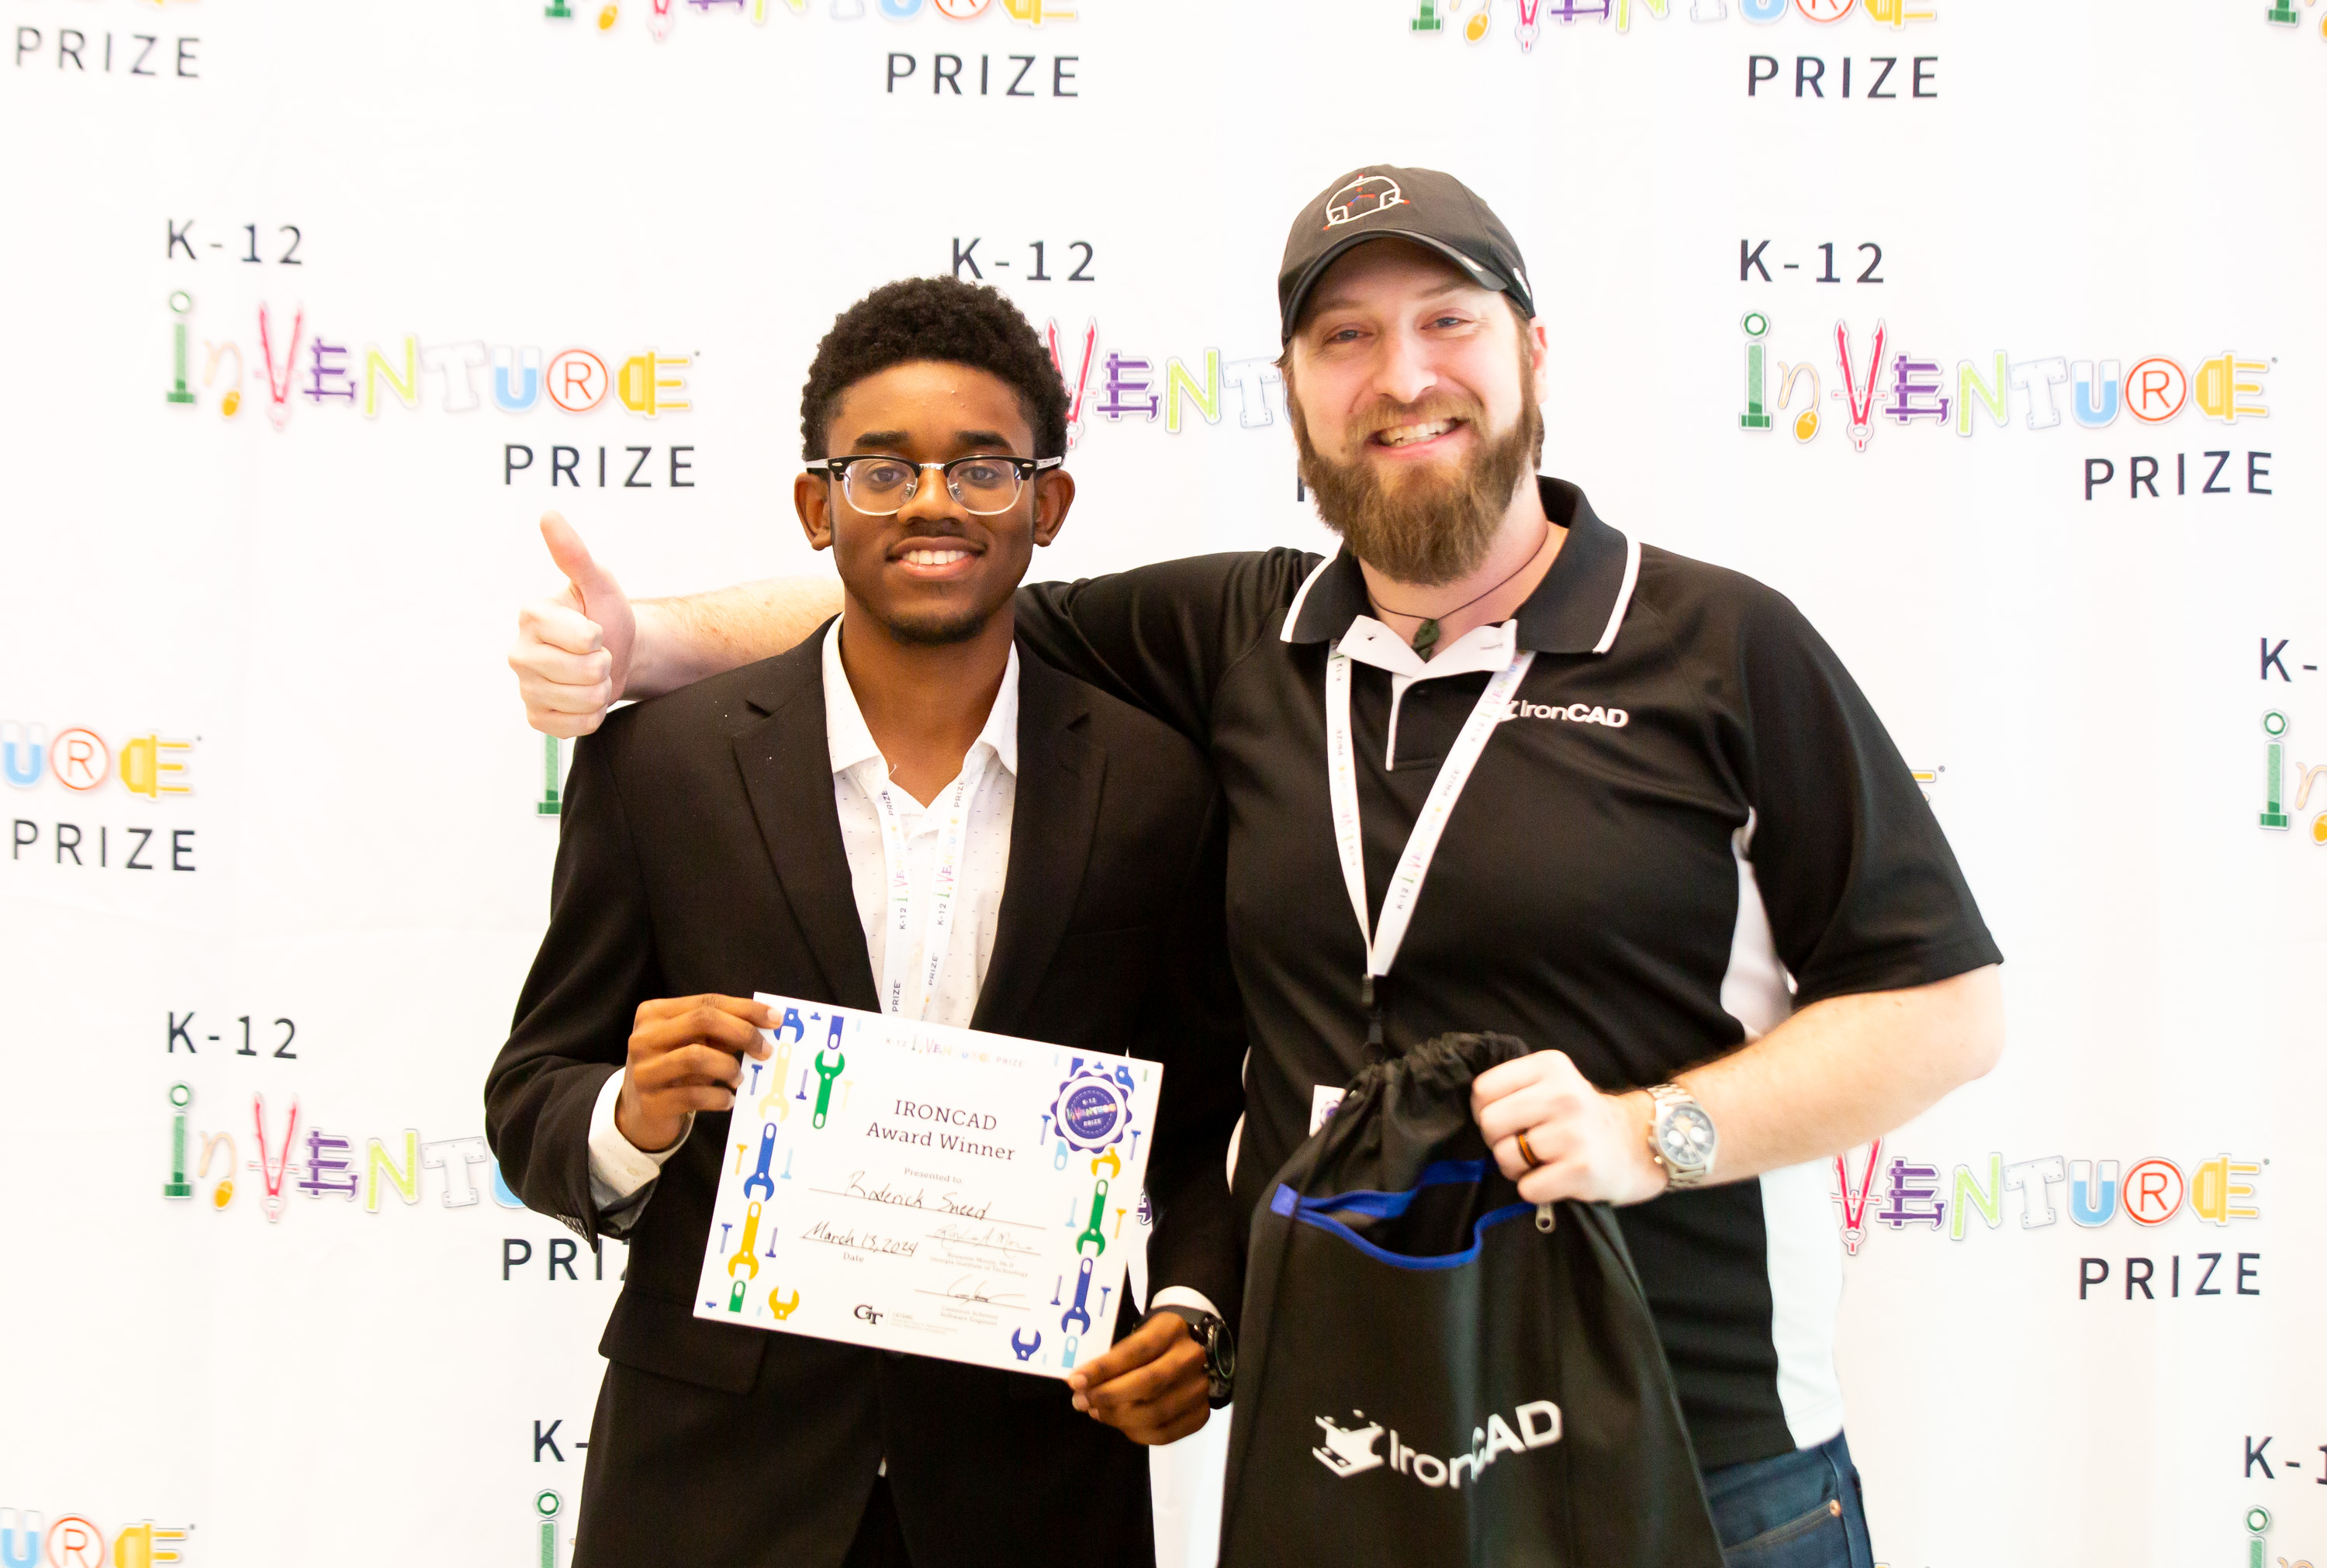 A smiling student holding a certificate and next to a smiling man holding a bag